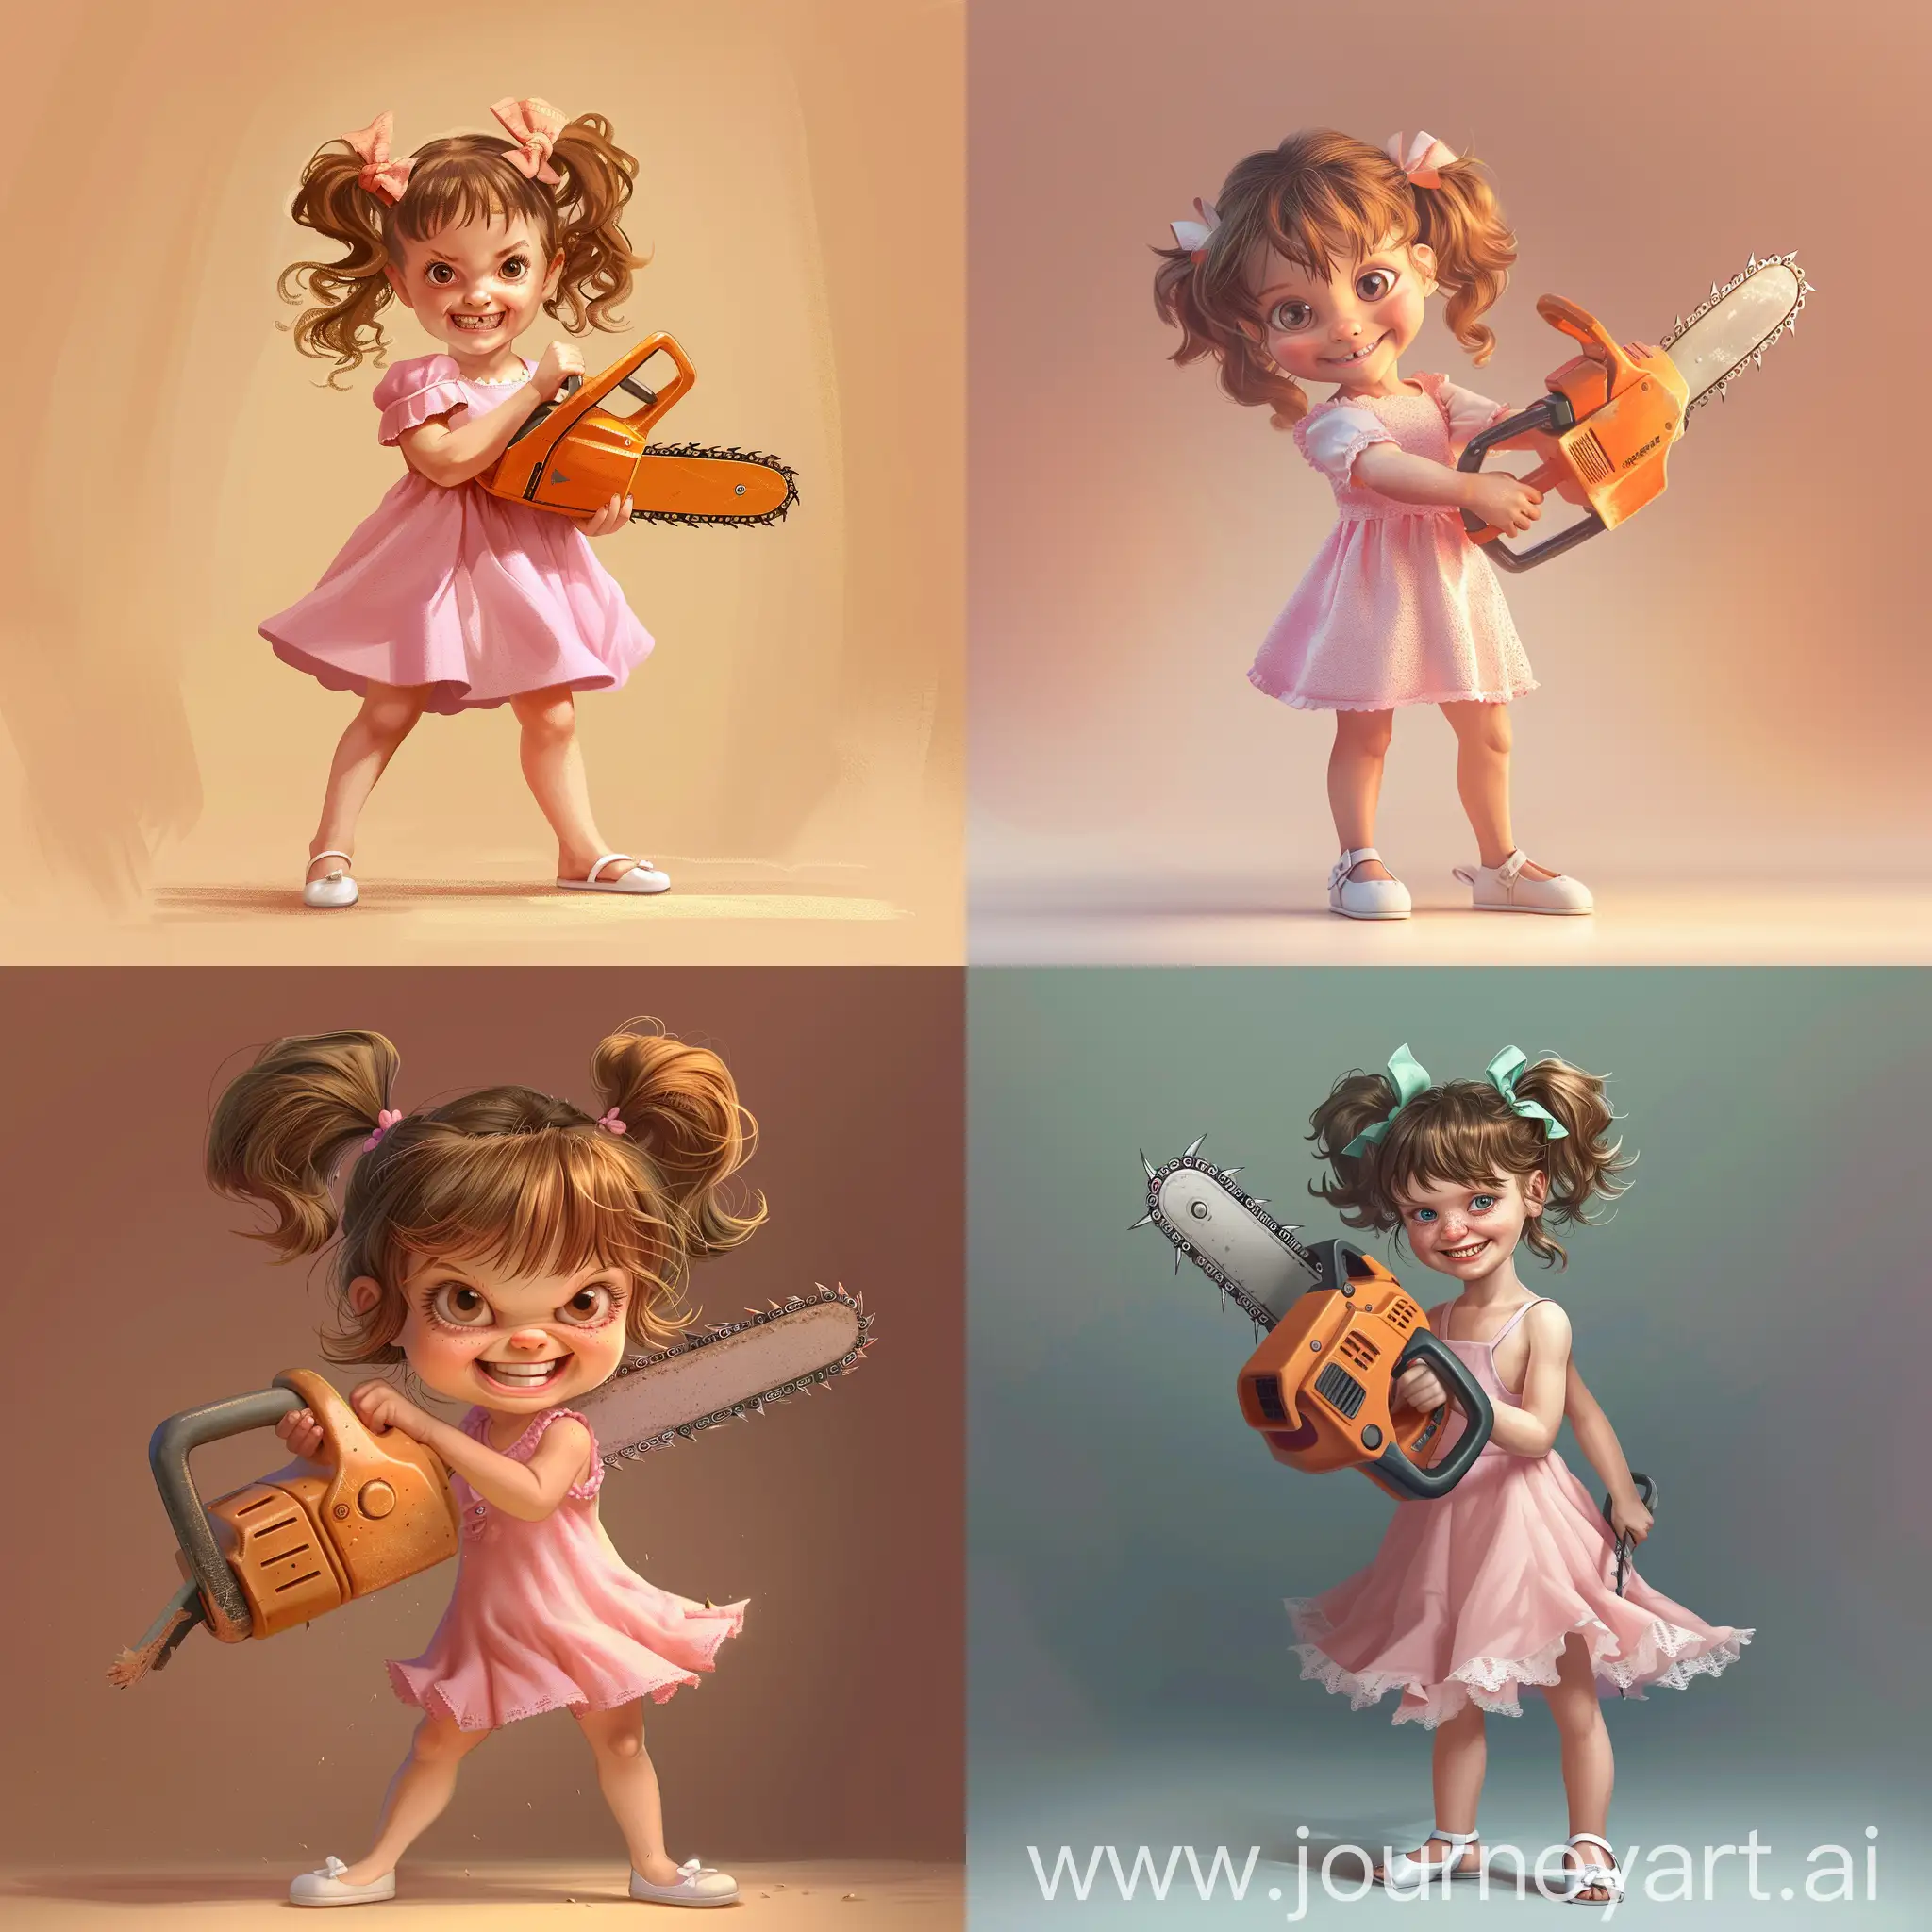 Adorable-Girl-Smiling-with-Chainsaw-Toy